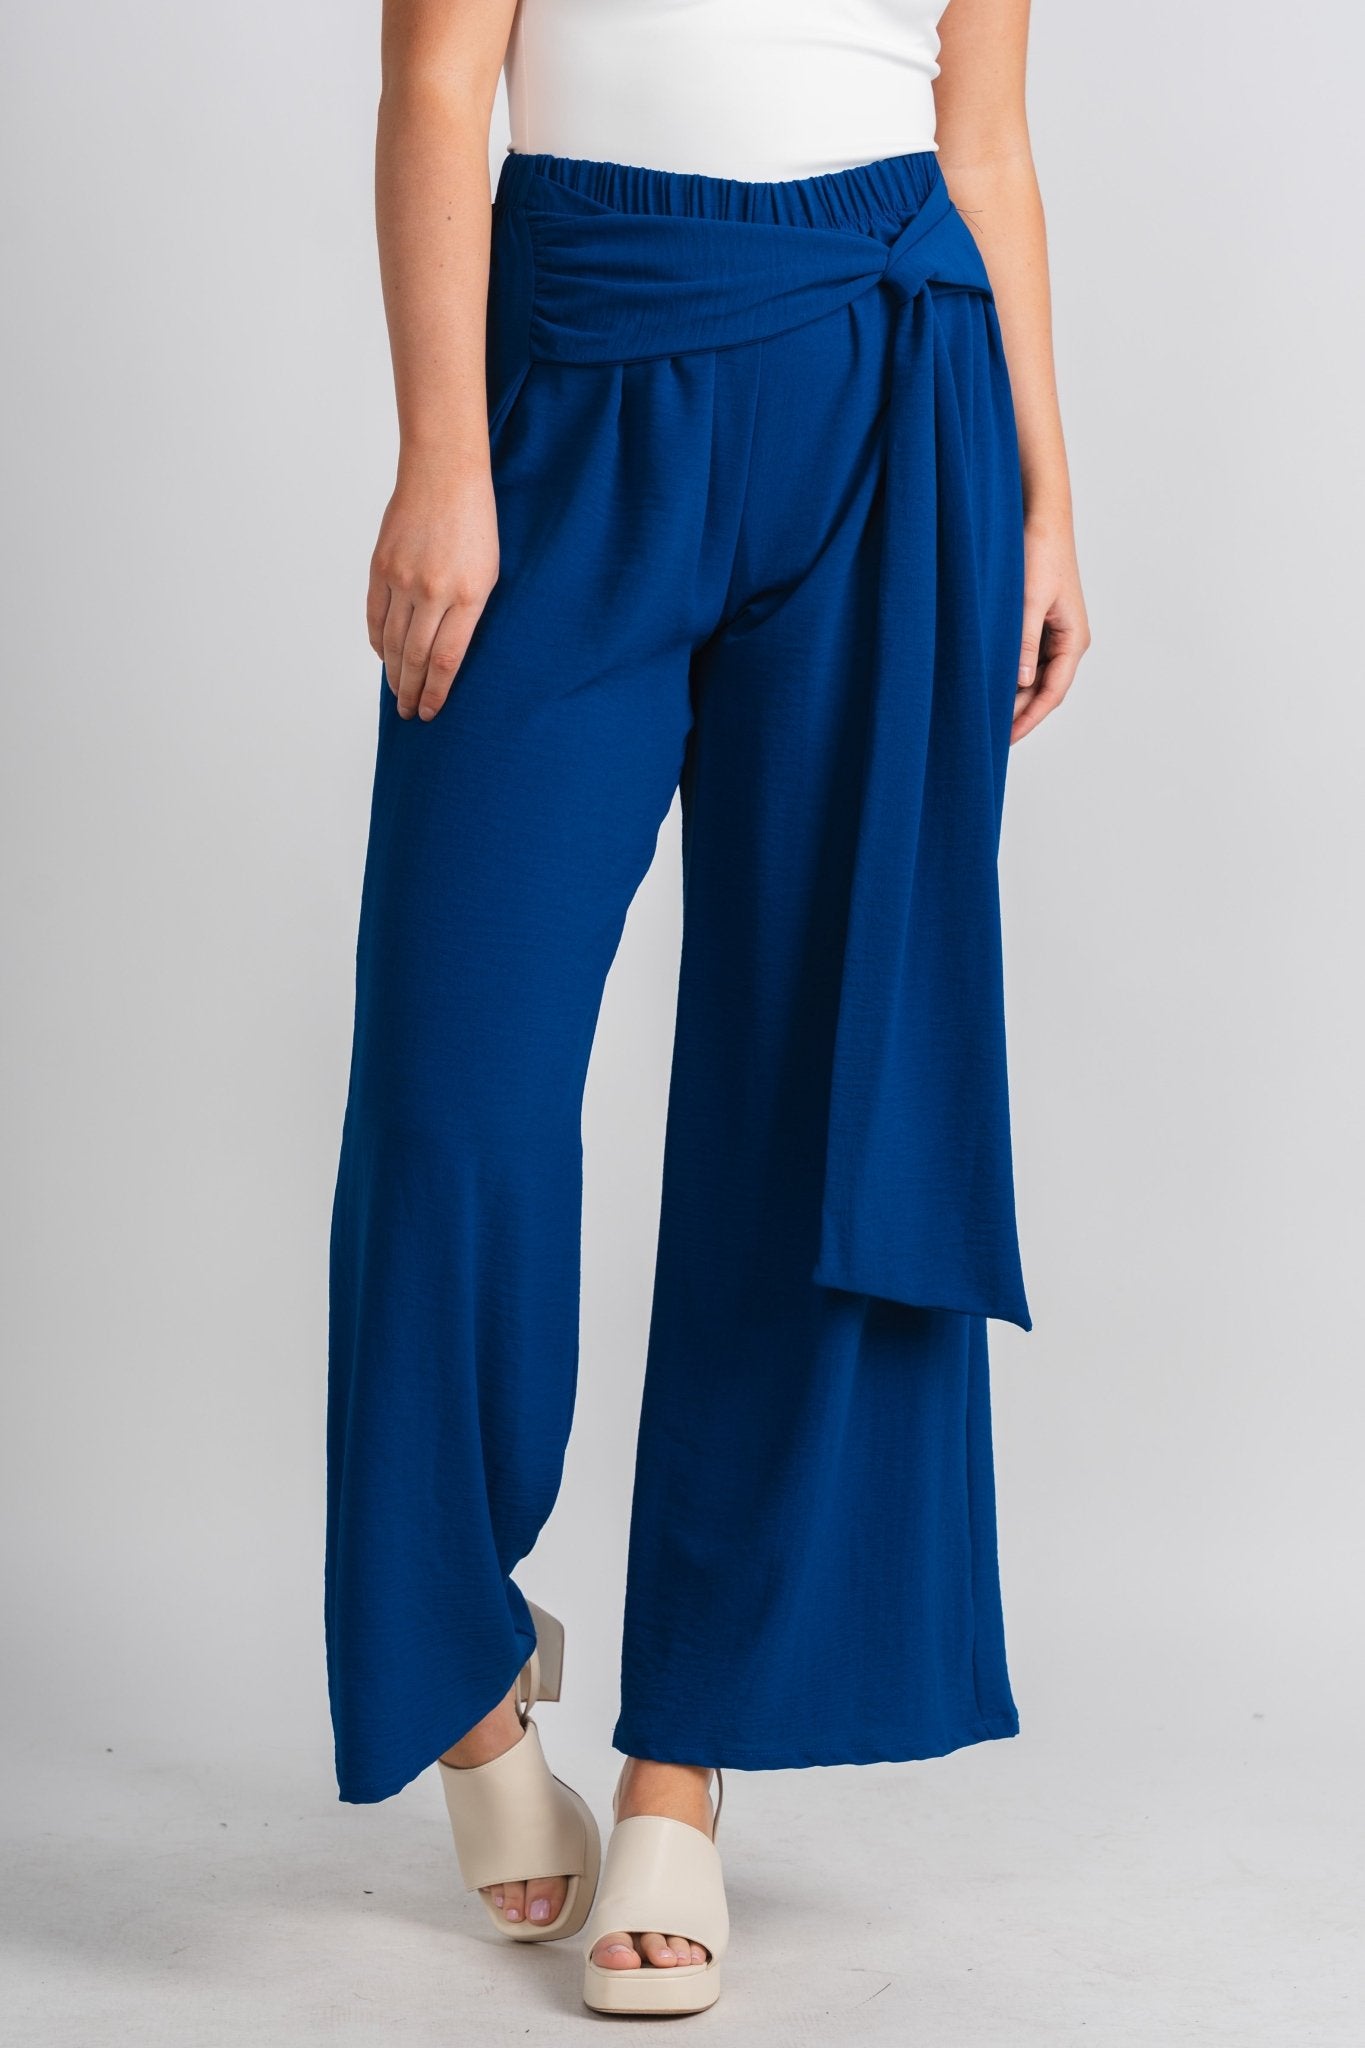 Tie waist wide leg pants royal blue - Stylish Pants - Trendy Staycation Outfits at Lush Fashion Lounge Boutique in Oklahoma City